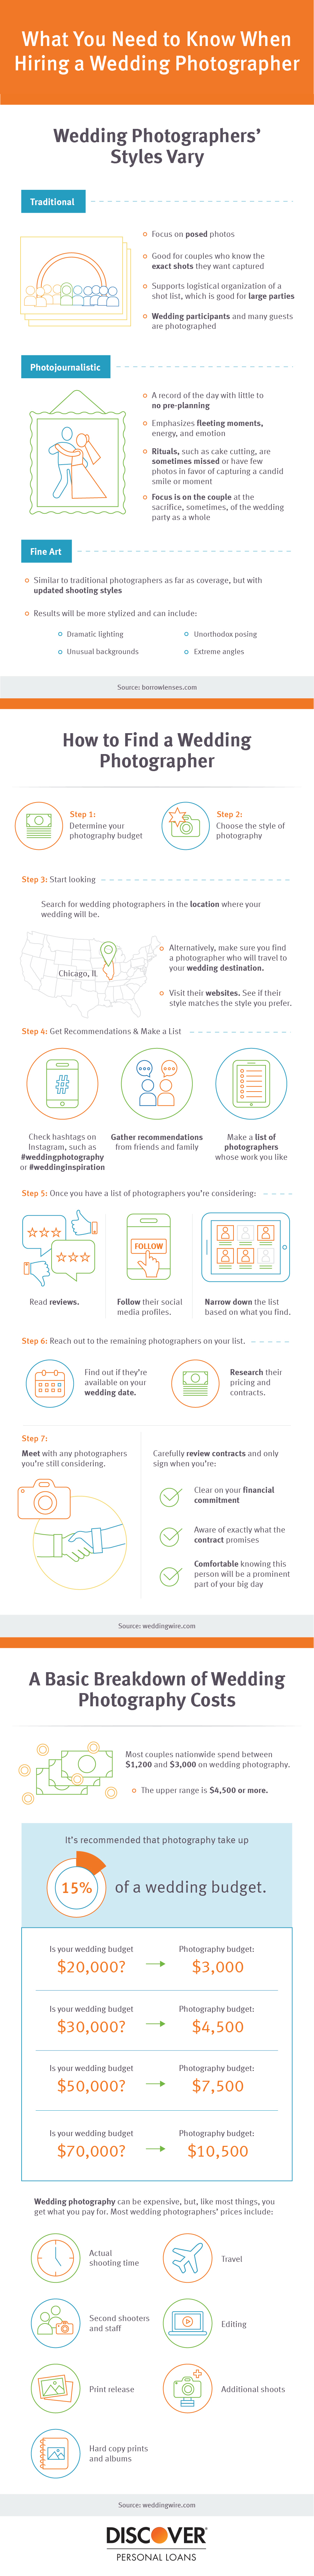 What You Need to Know When Hiring a Wedding Photographer